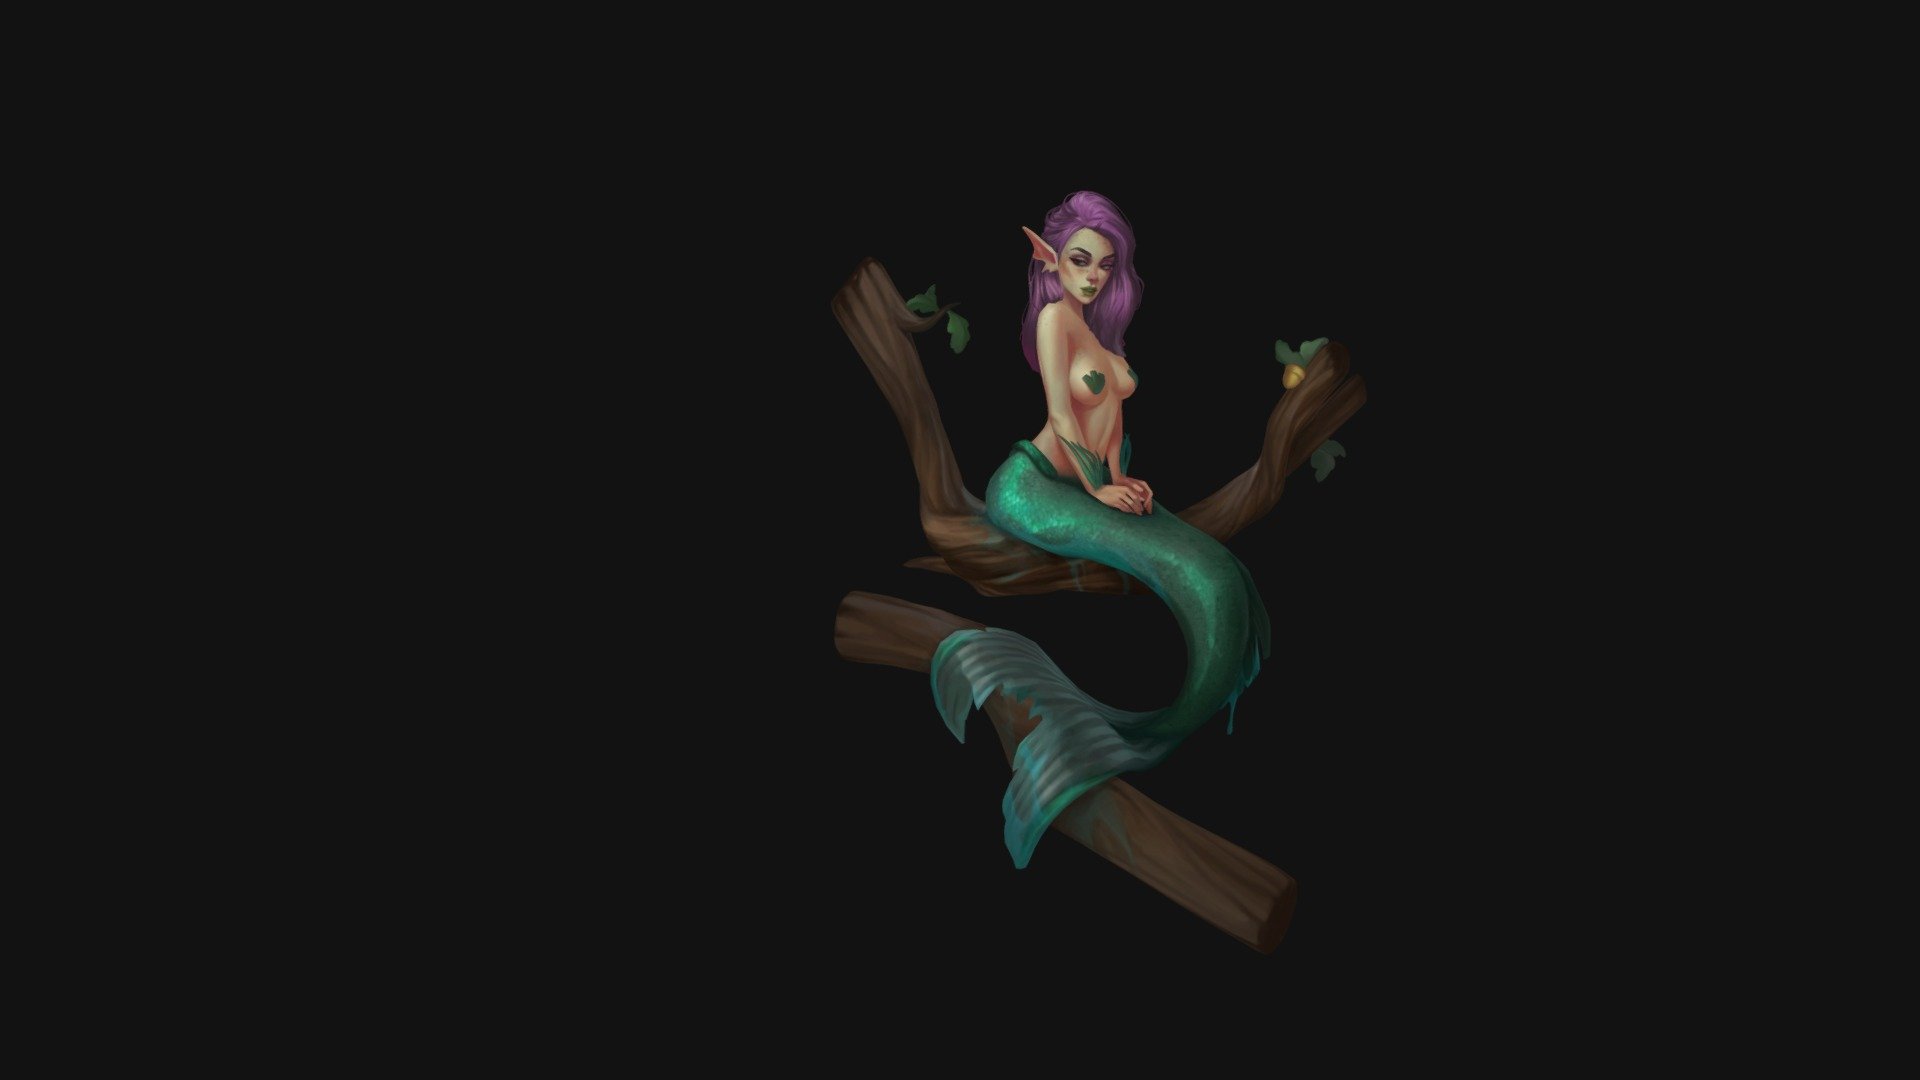 Hand painted texture based on Junica Hots illustration. Model by Tamas Sarffy.

https://www.artstation.com/artwork/bxyNm
https://www.artstation.com/artwork/o4oPB - MERMAID - 3D model by mligeti 3d model